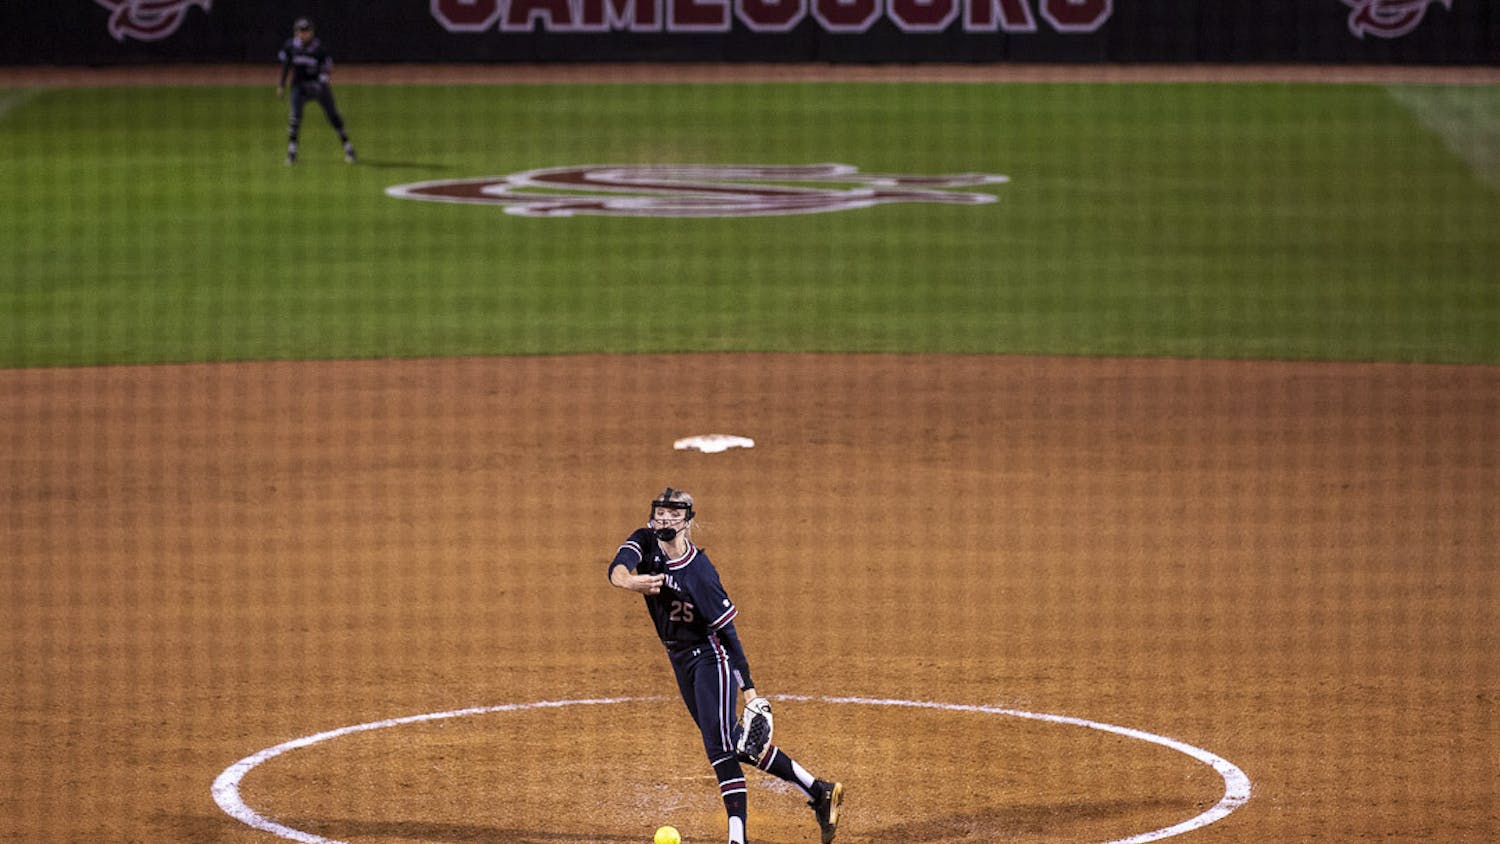 Freshman pitcher Jodi Heard throws the ball to LSU's batter during the second matchup of the doubleheader at Beckham Field on March 13, 2023. The Tigers beat the Gamecocks 5-1.